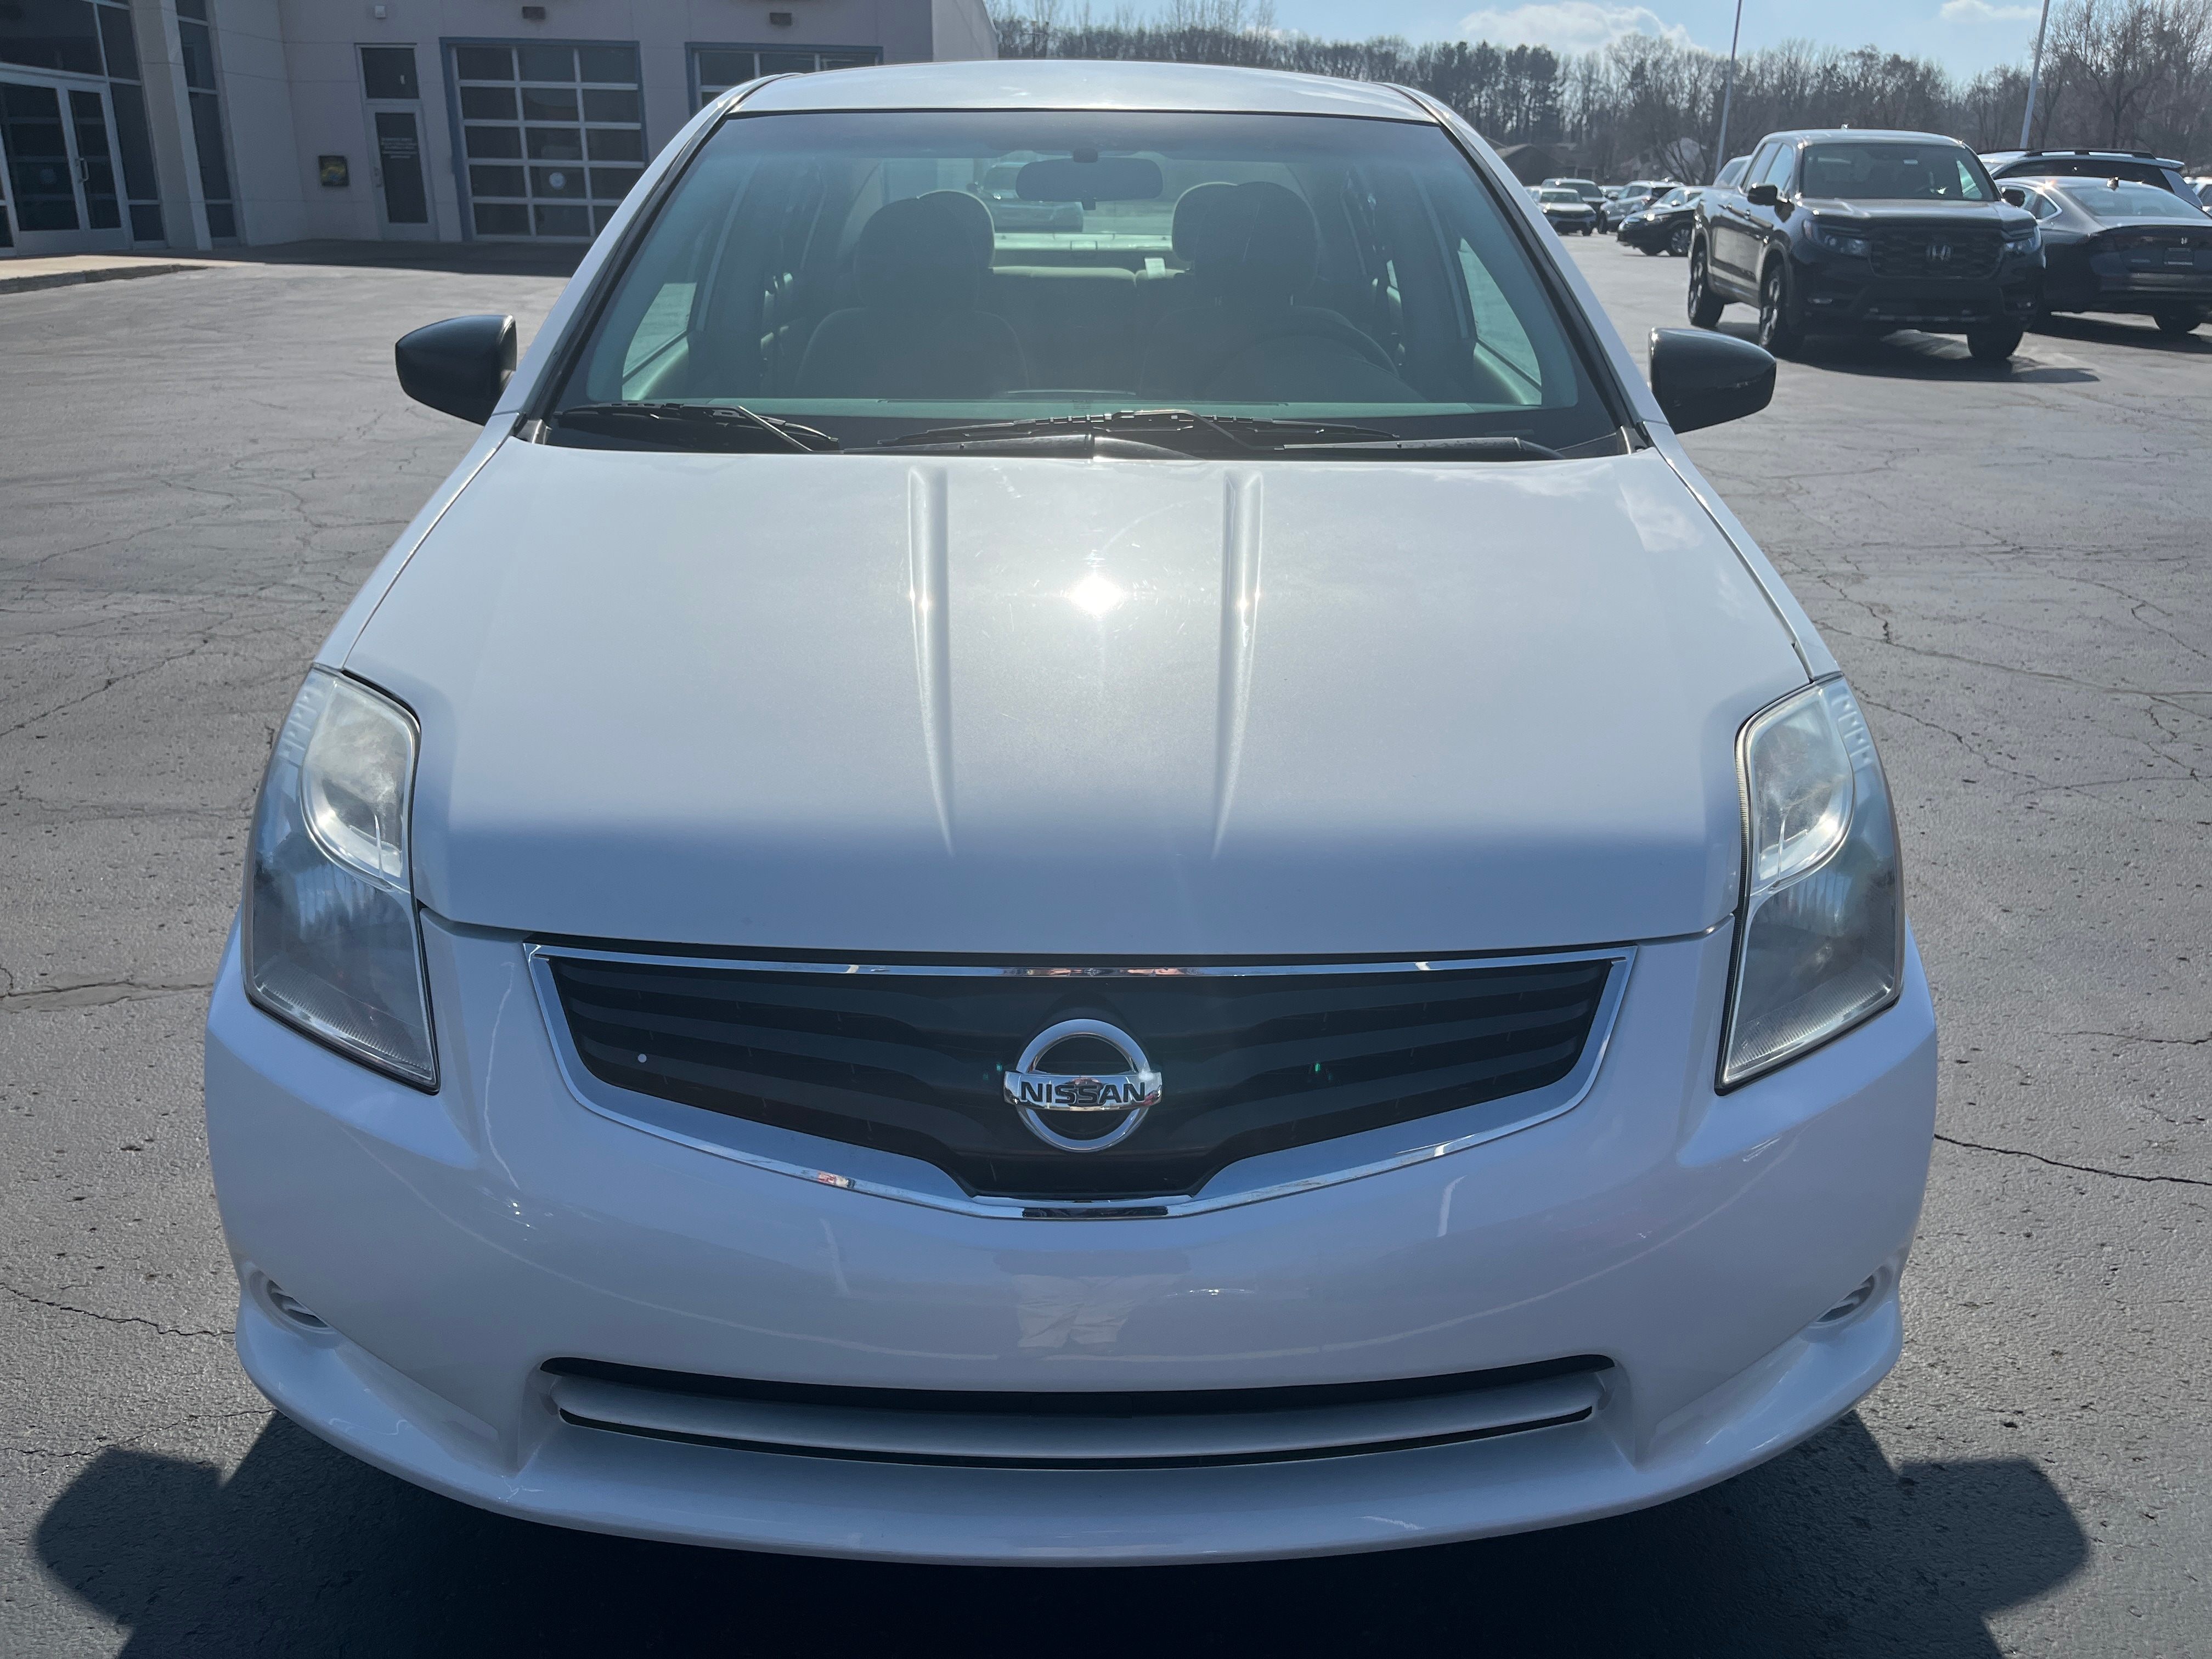 Used 2011 Nissan Sentra  with VIN 3N1AB6AP6BL694733 for sale in Battle Creek, MI